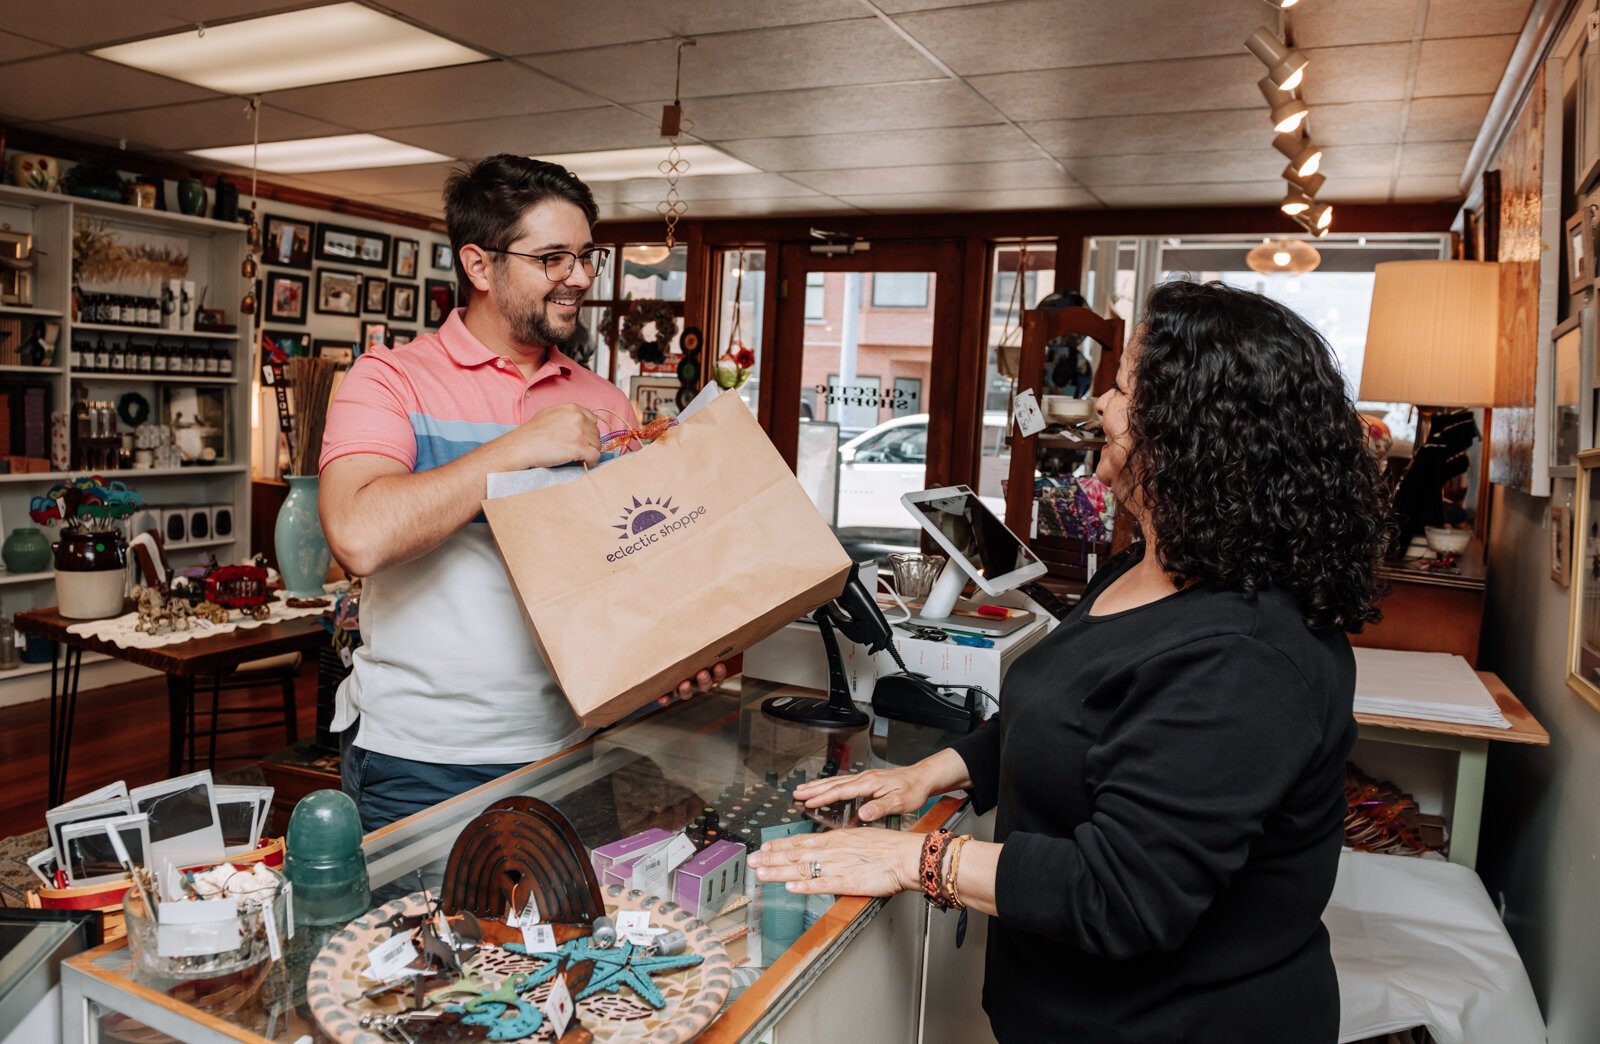 Maria Smith helps customer Mike Barnett with a purchase at Eclectic Shoppe, 42 W Canal St, Wabash, IN.